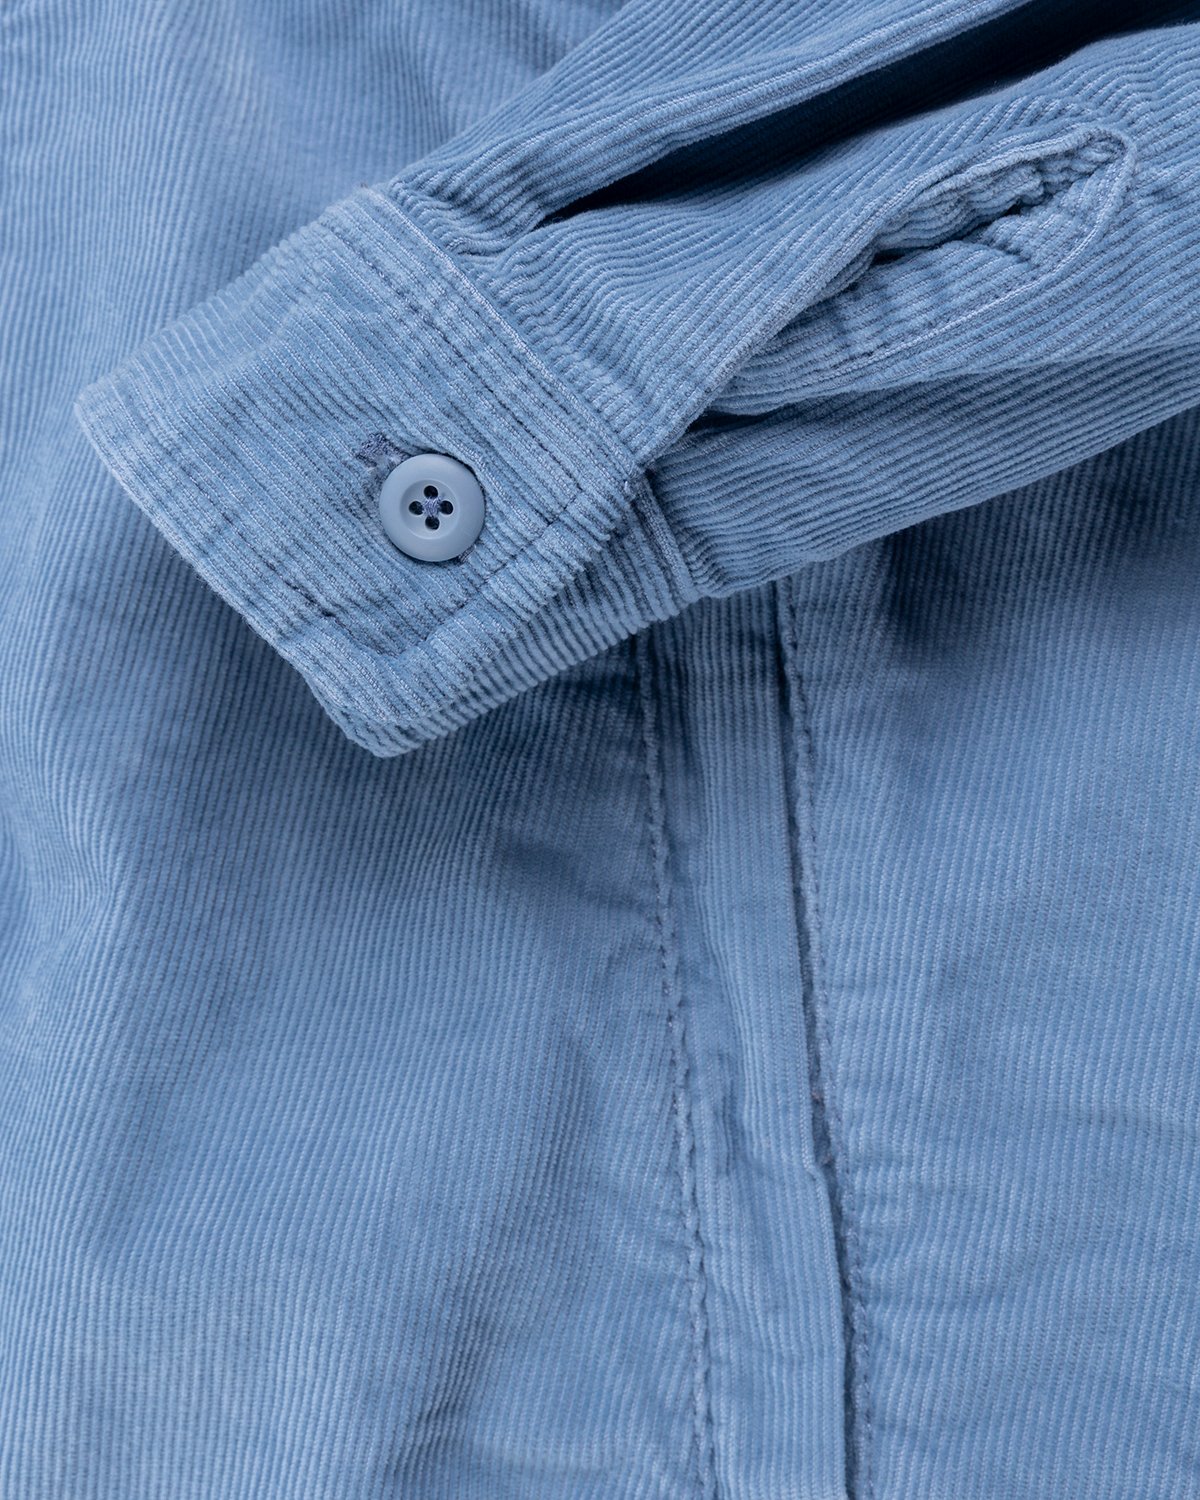 Carhartt WIP - Dixon Shirt Jacket Icy Water Rinsed - Clothing - Blue - Image 4